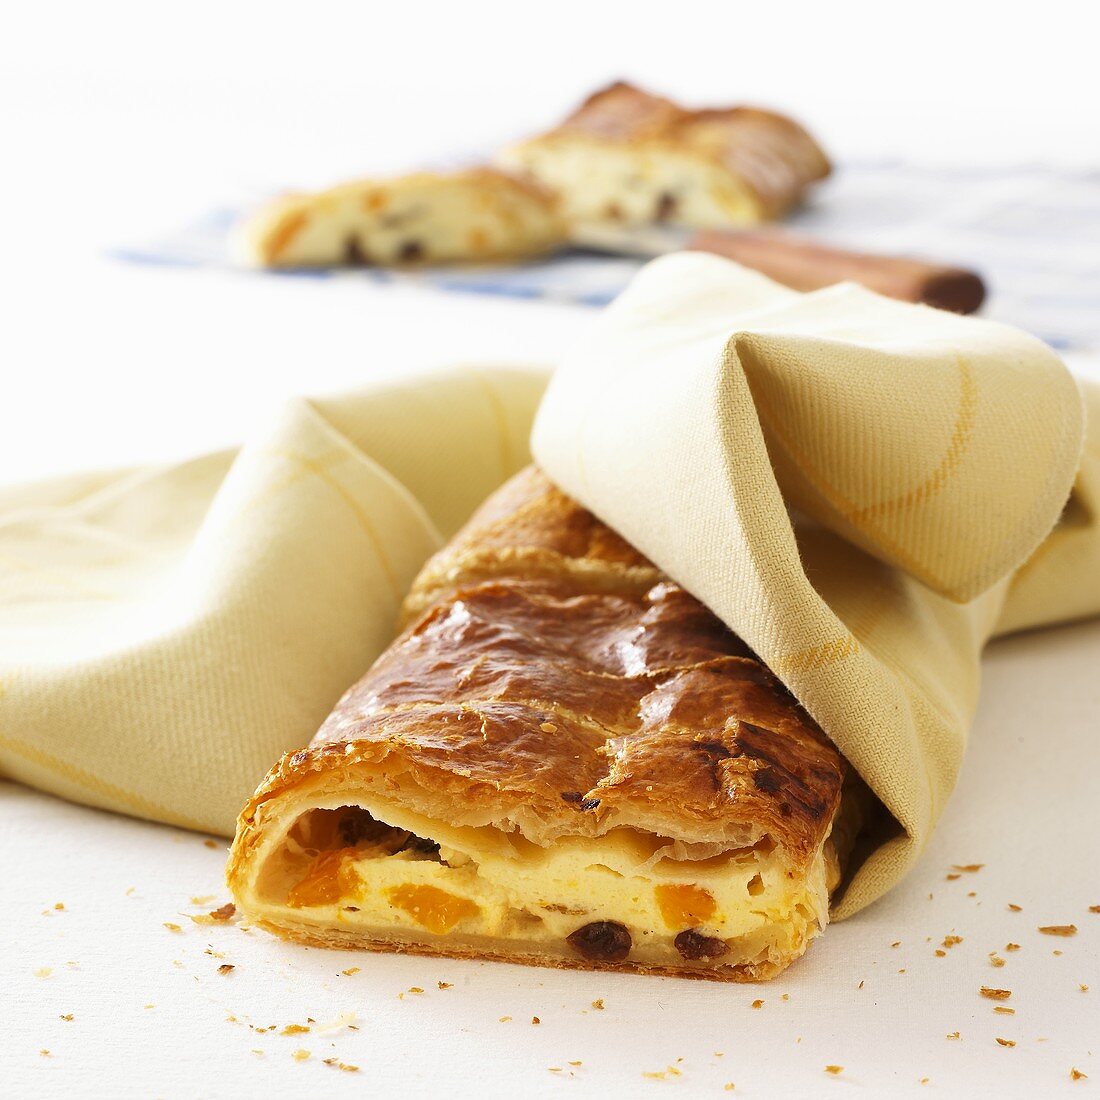 Quark strudel made with puff pastry